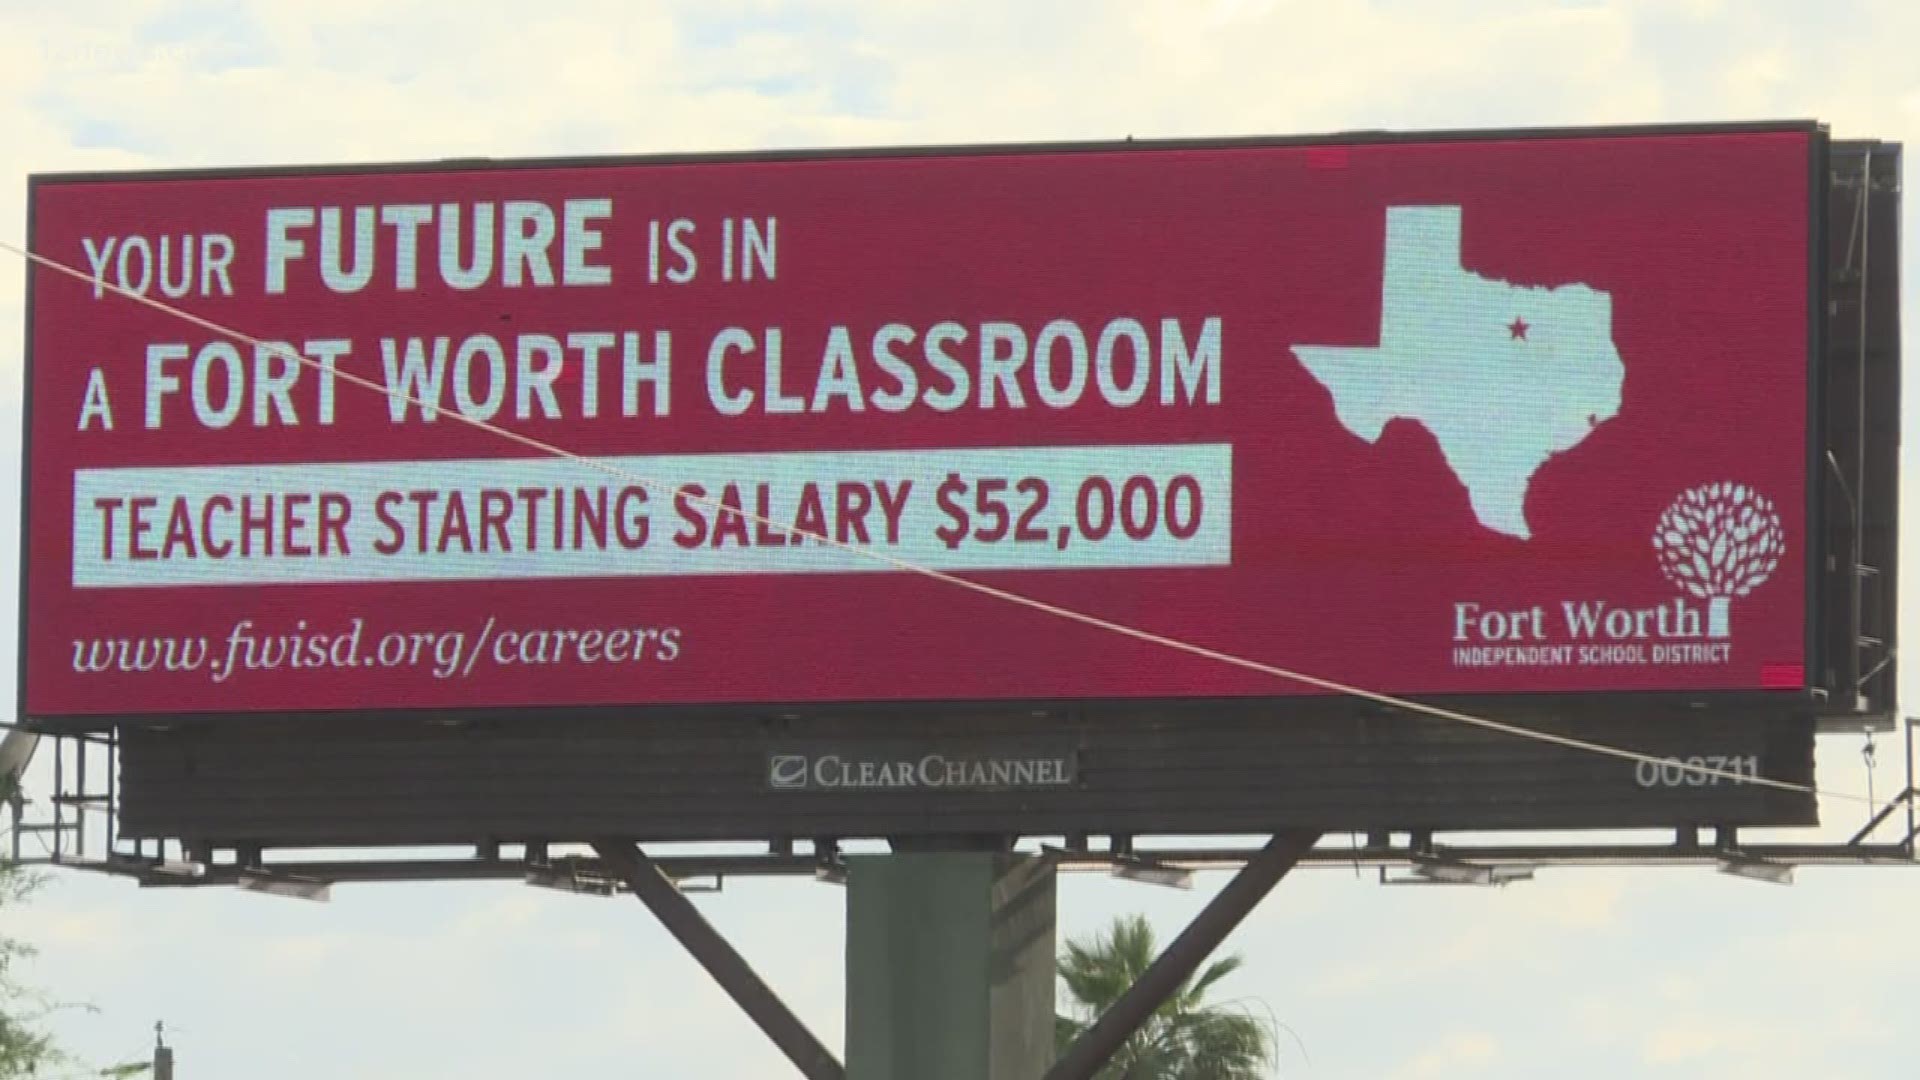 "Our starting salary for teachers is $52,000. So our campaign is aimed not only at teachers but those that just graduated," said Fort Worth ISD spokesman Clint Bond.